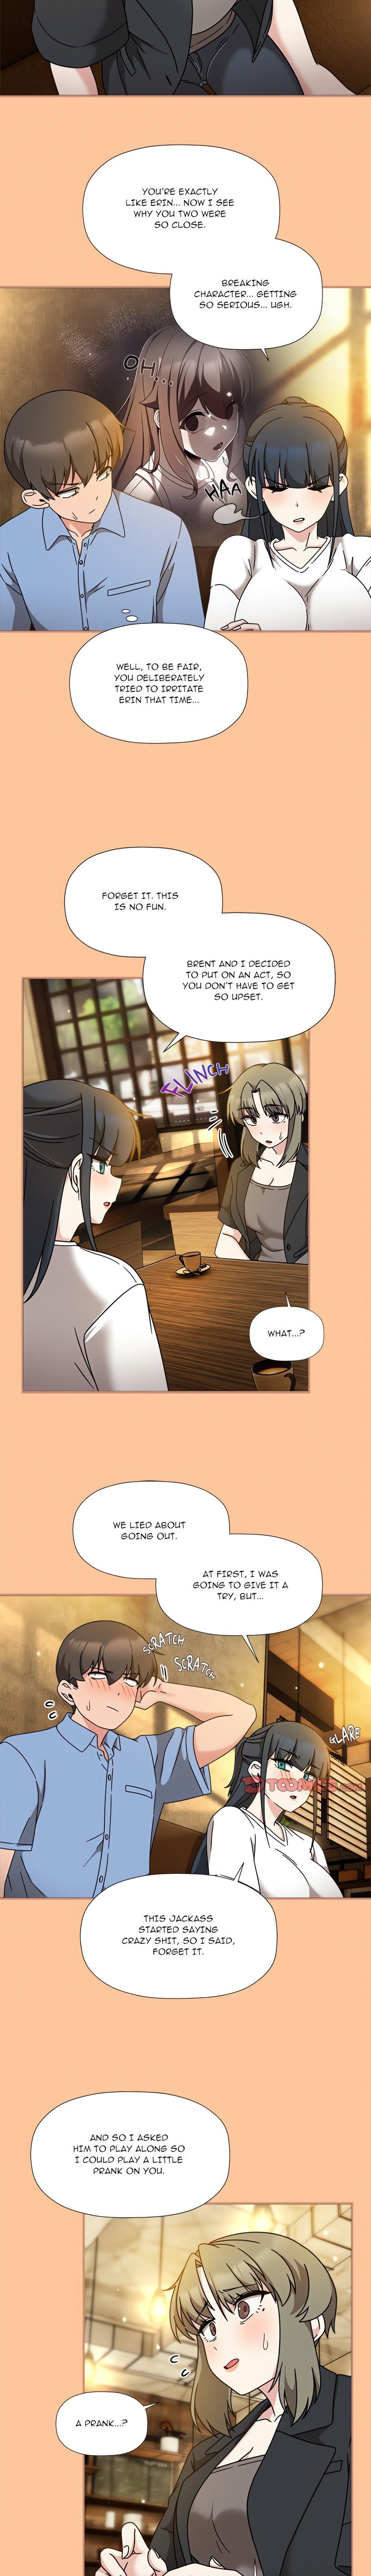 #Follow Me Chapter 58 - Page 14